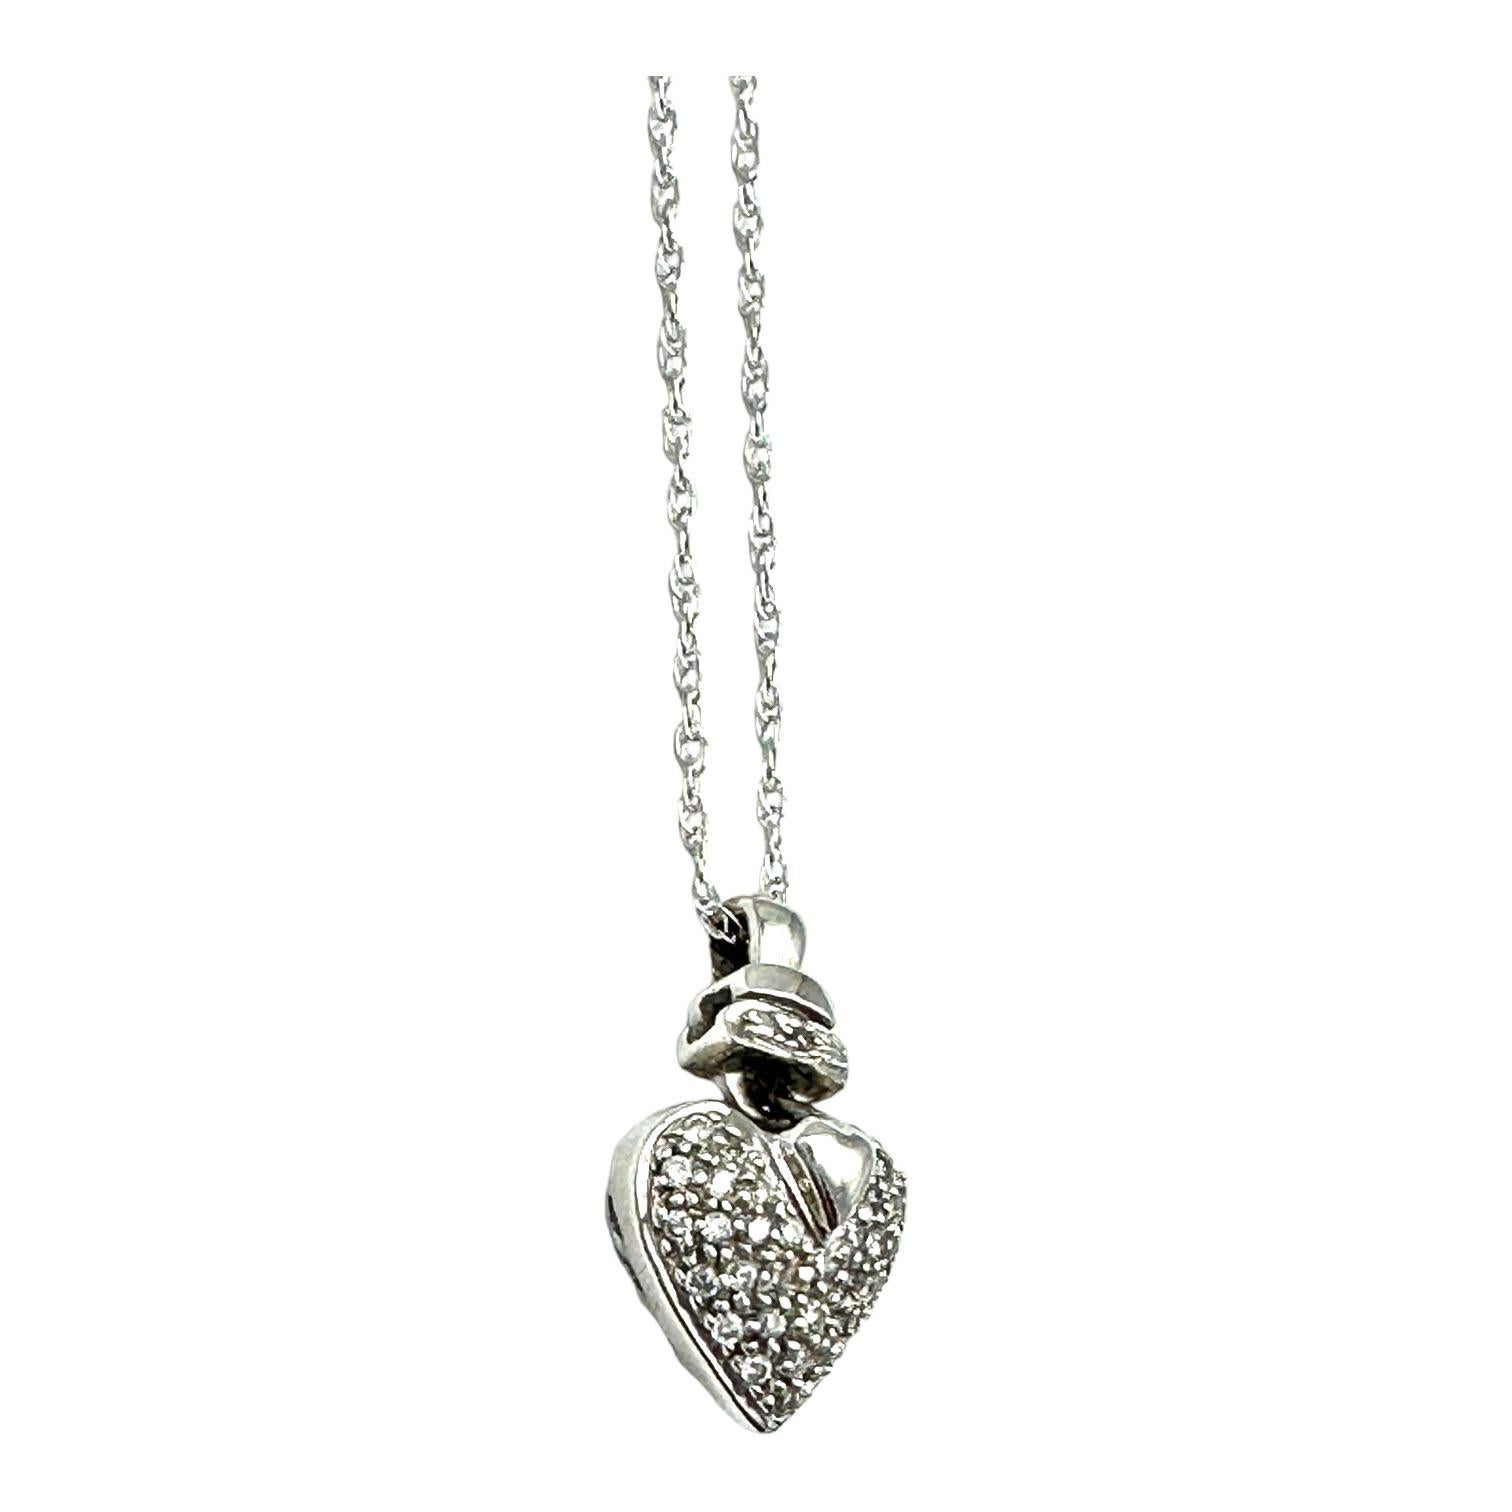 This 14Kt White Gold Pave Puff Diamond Heart Pendant is a classic piece that will make a great addition to any jewelry collection. The focal point of this pendant is the gorgeous puff diamond heart, crafted with expert detail and precision to create